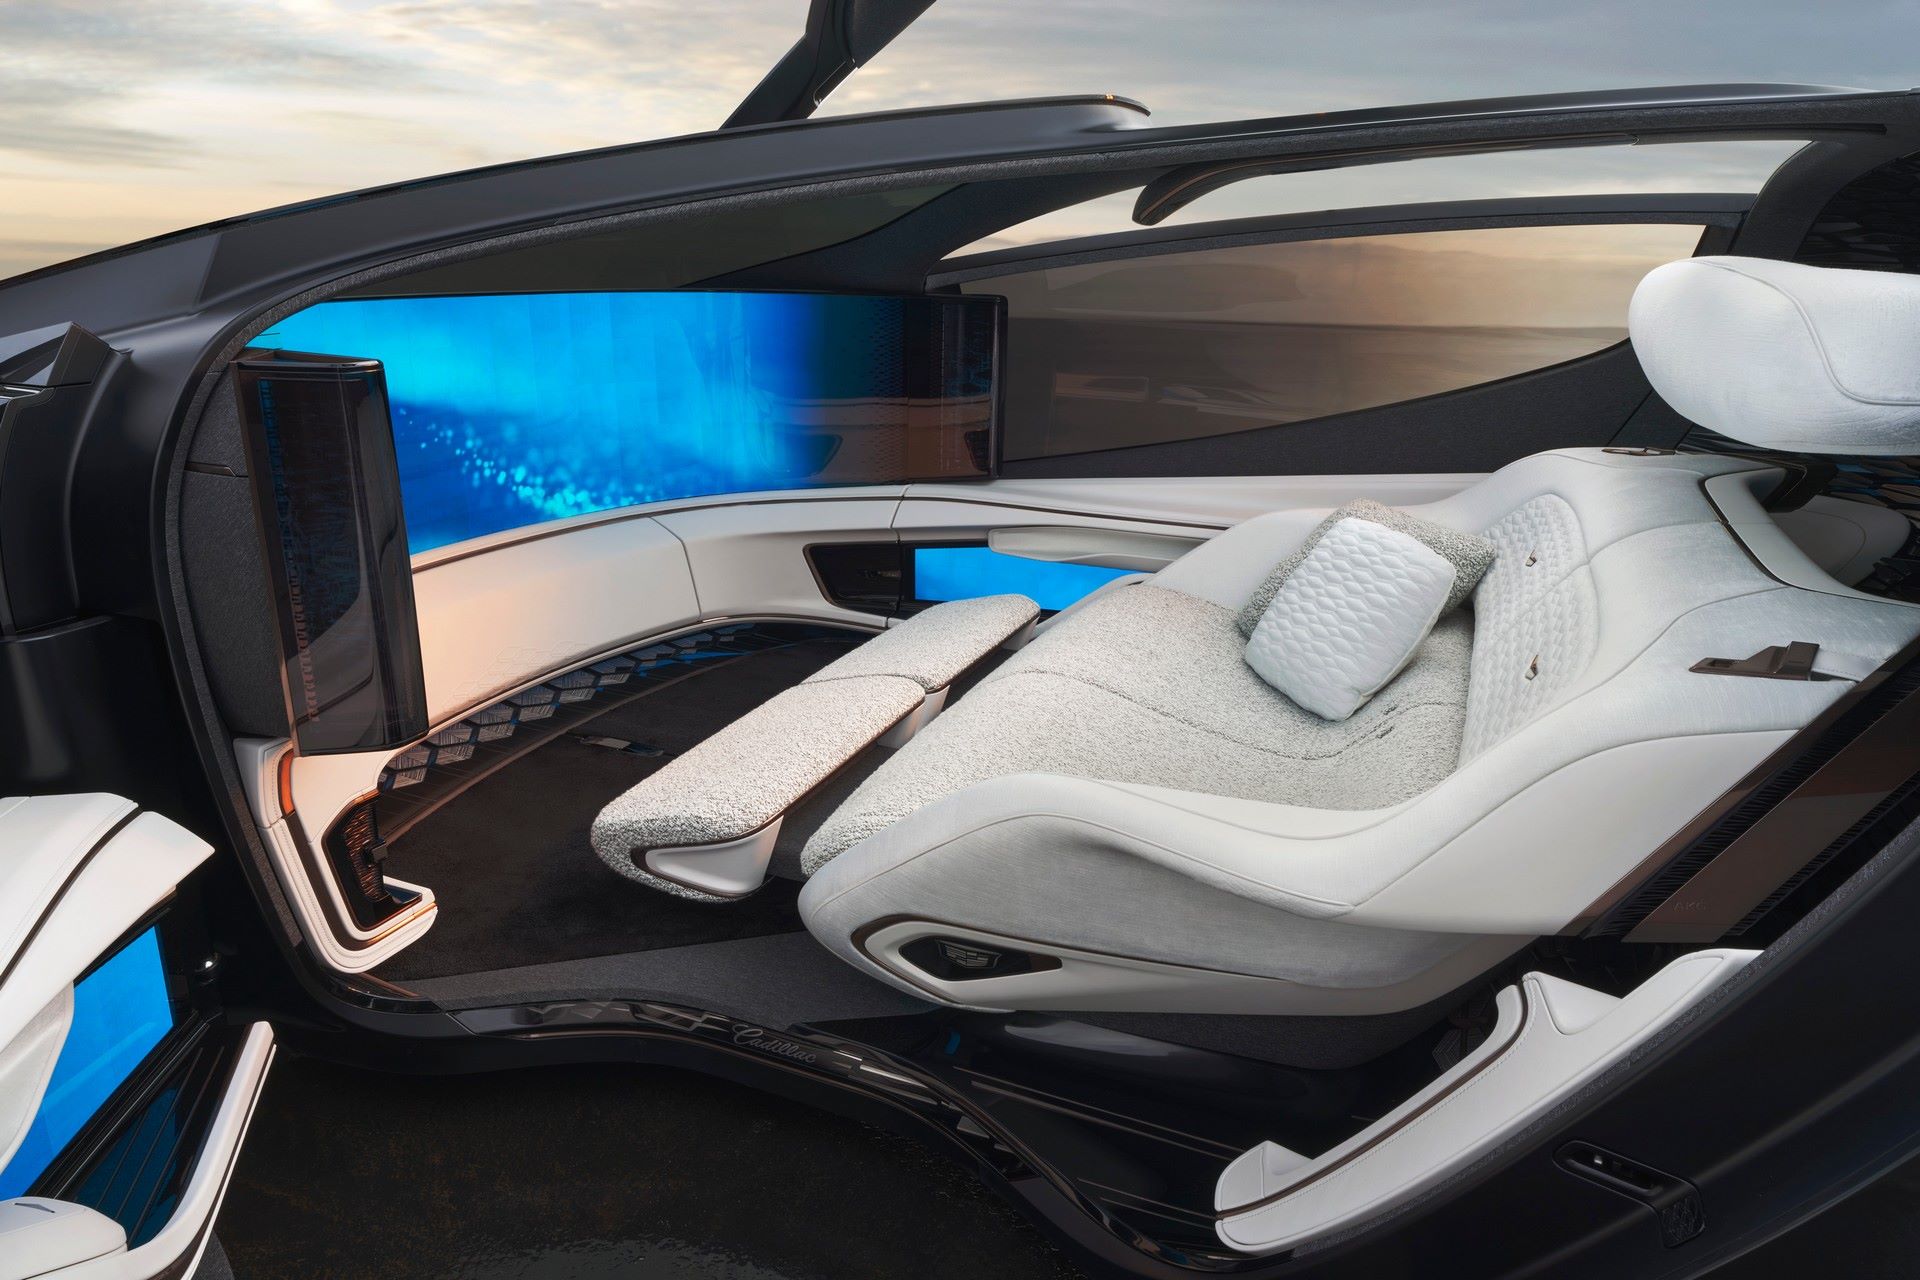 Cadillac-InnerSpace-Concept-33